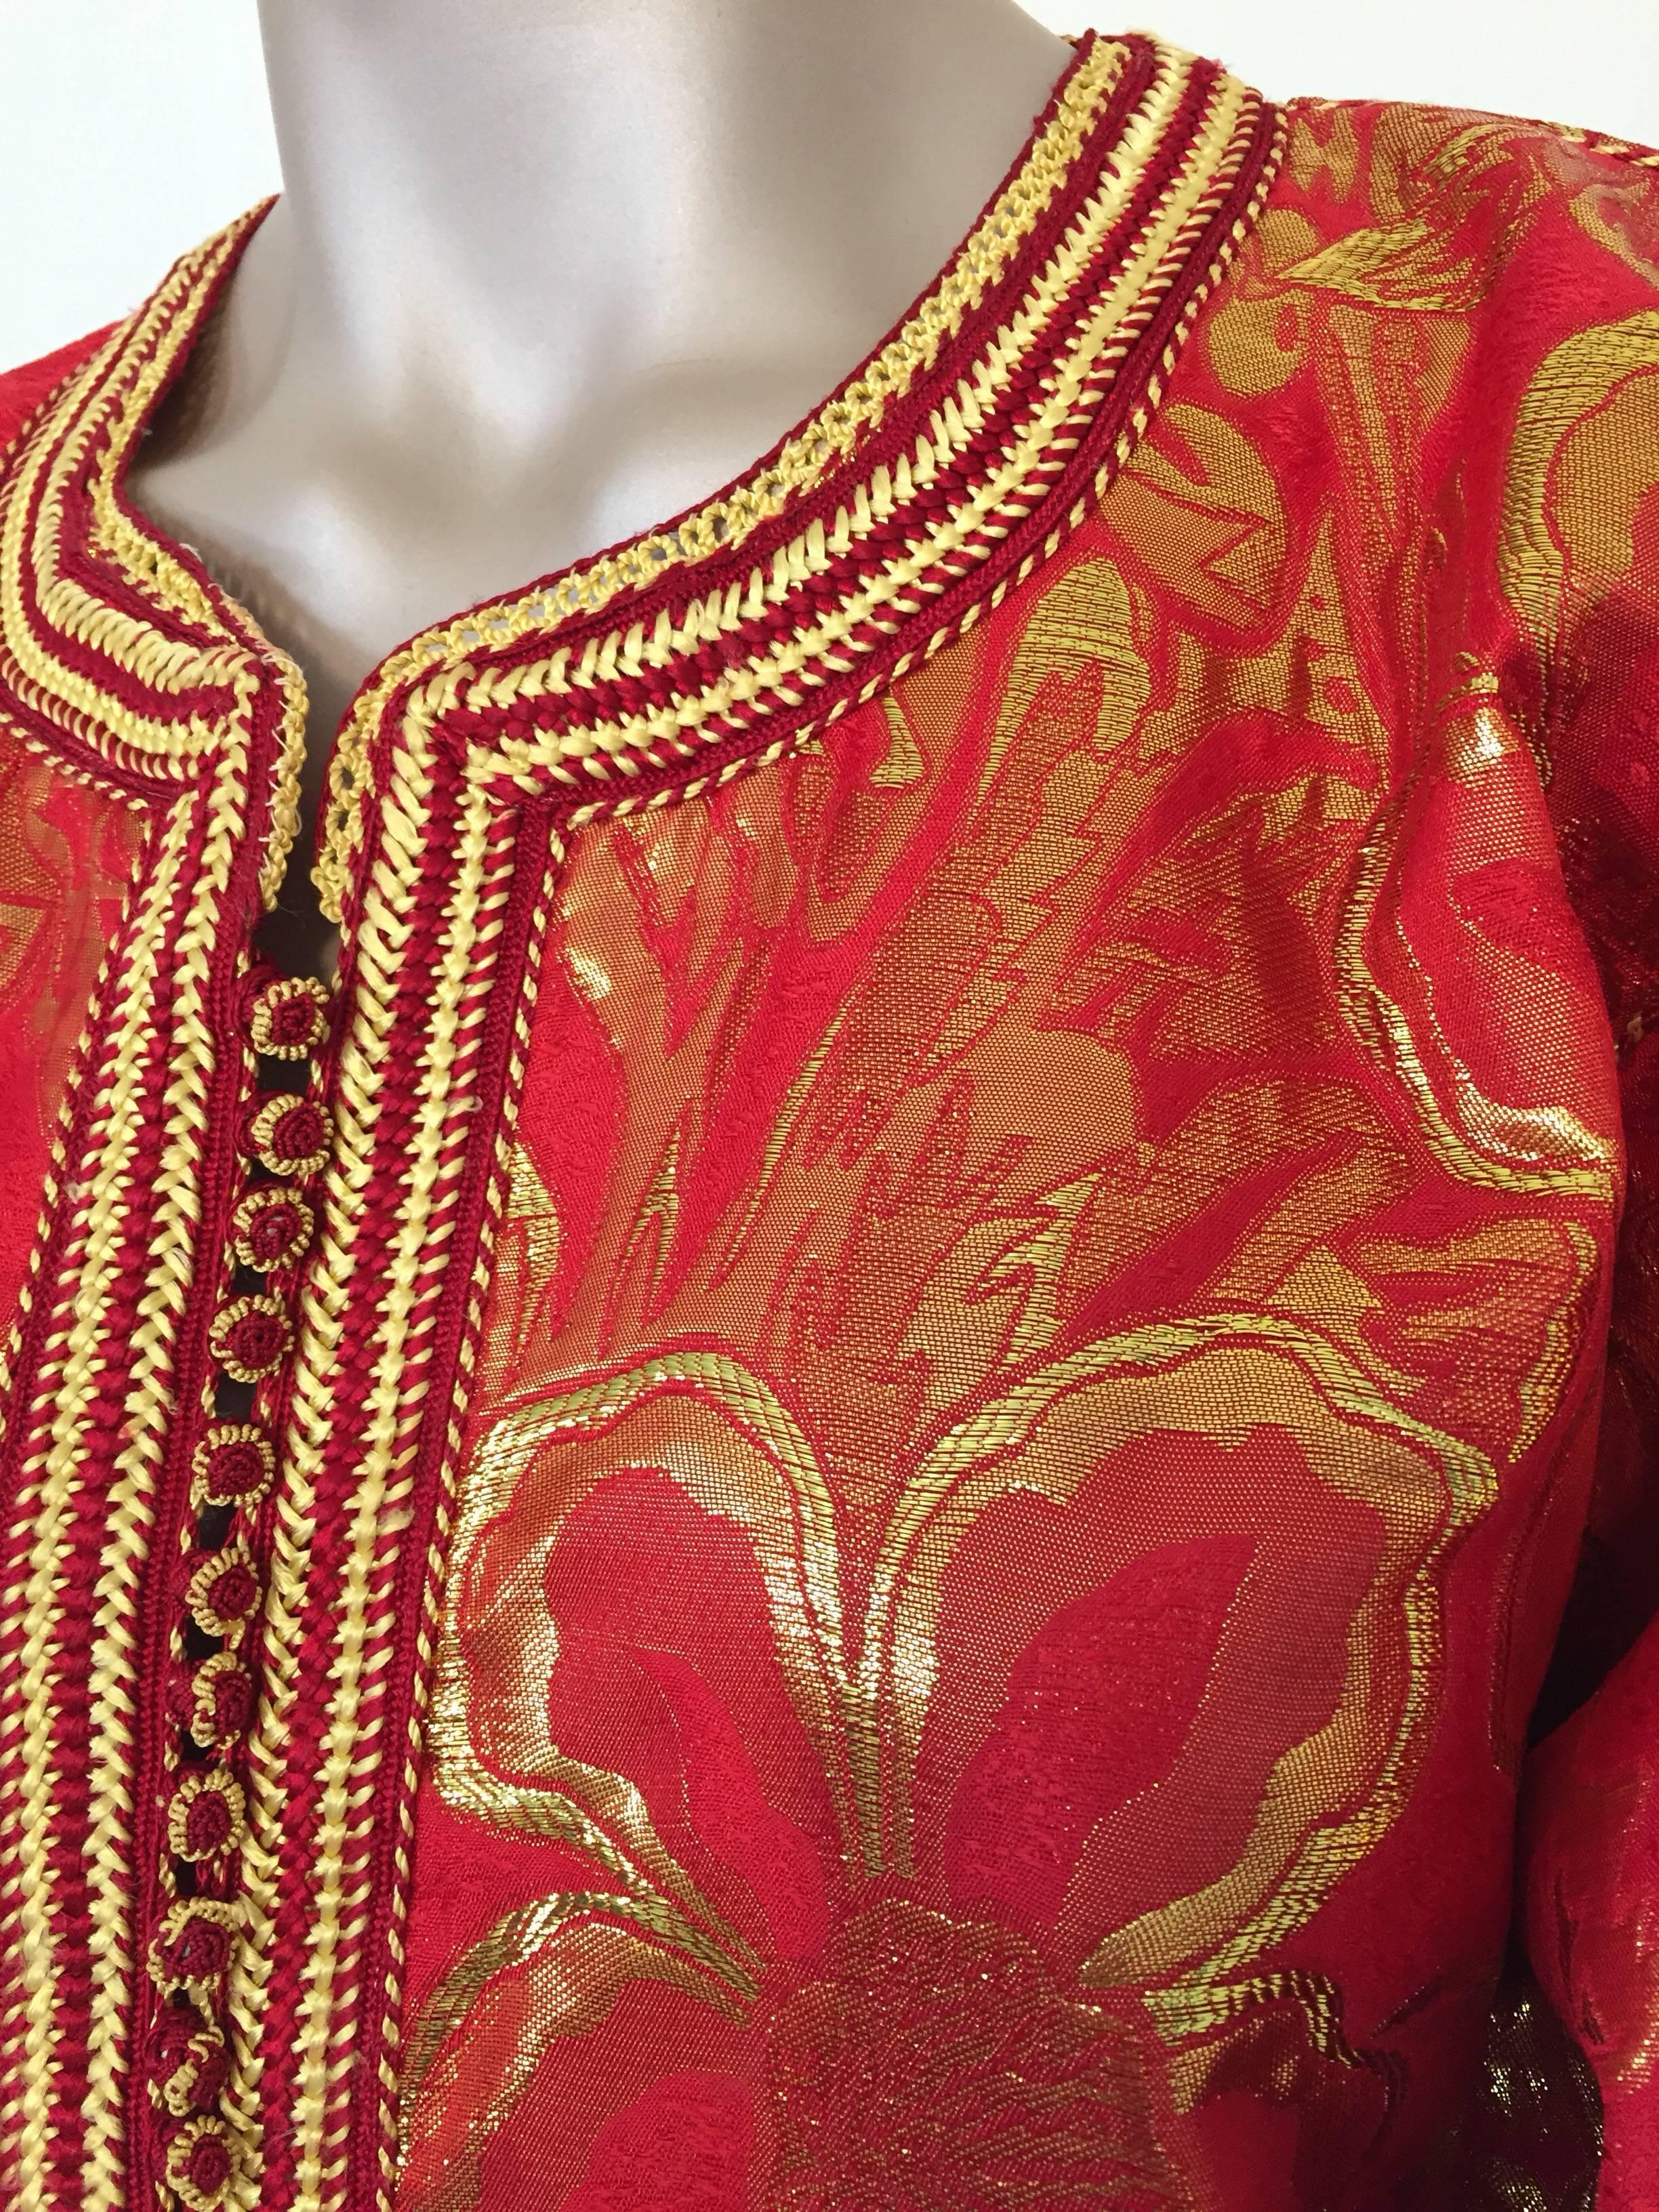 Women's Vintage Moroccan Kaftan 1970s Red and Gold Floral Brocade Caftan Maxi Dress For Sale